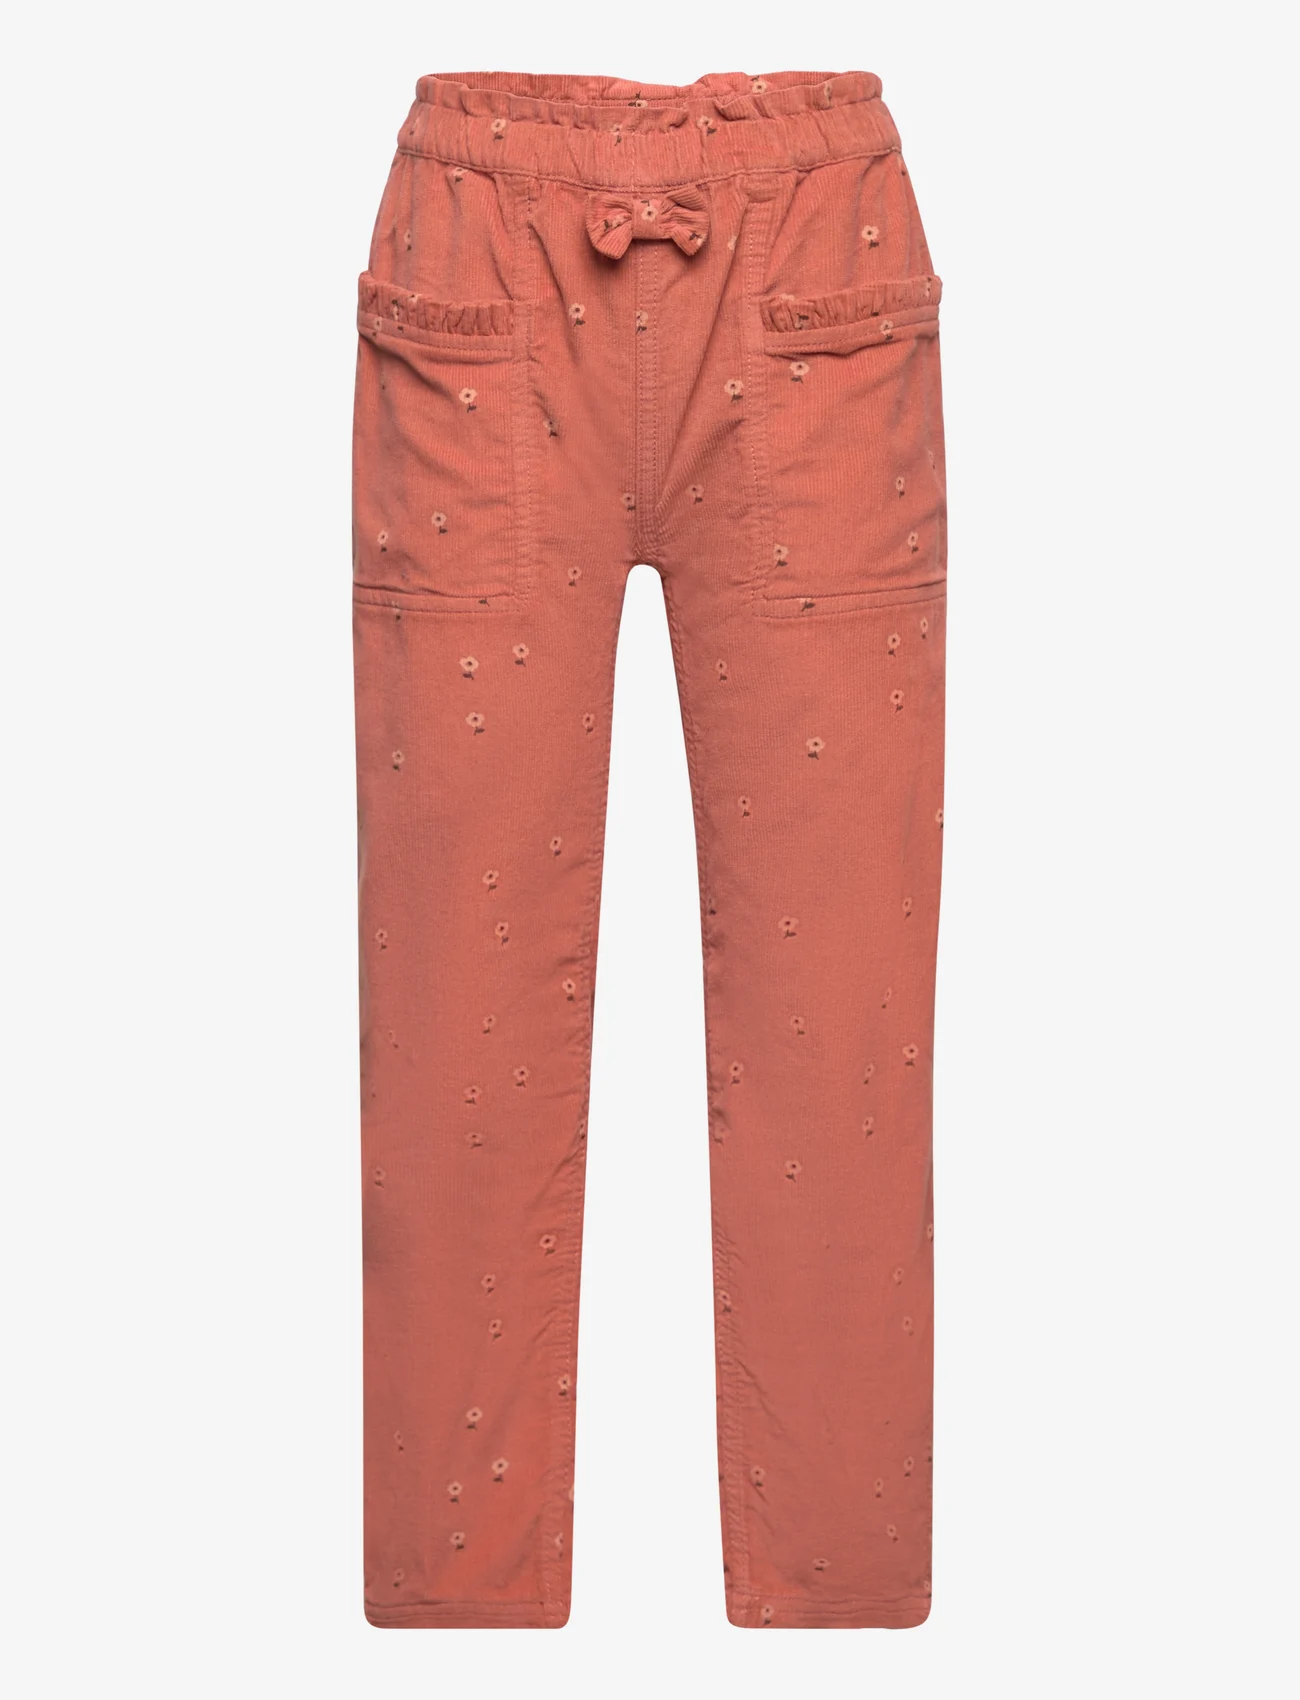 Hust & Claire - Tinna - Trousers - trousers - red clay - 0